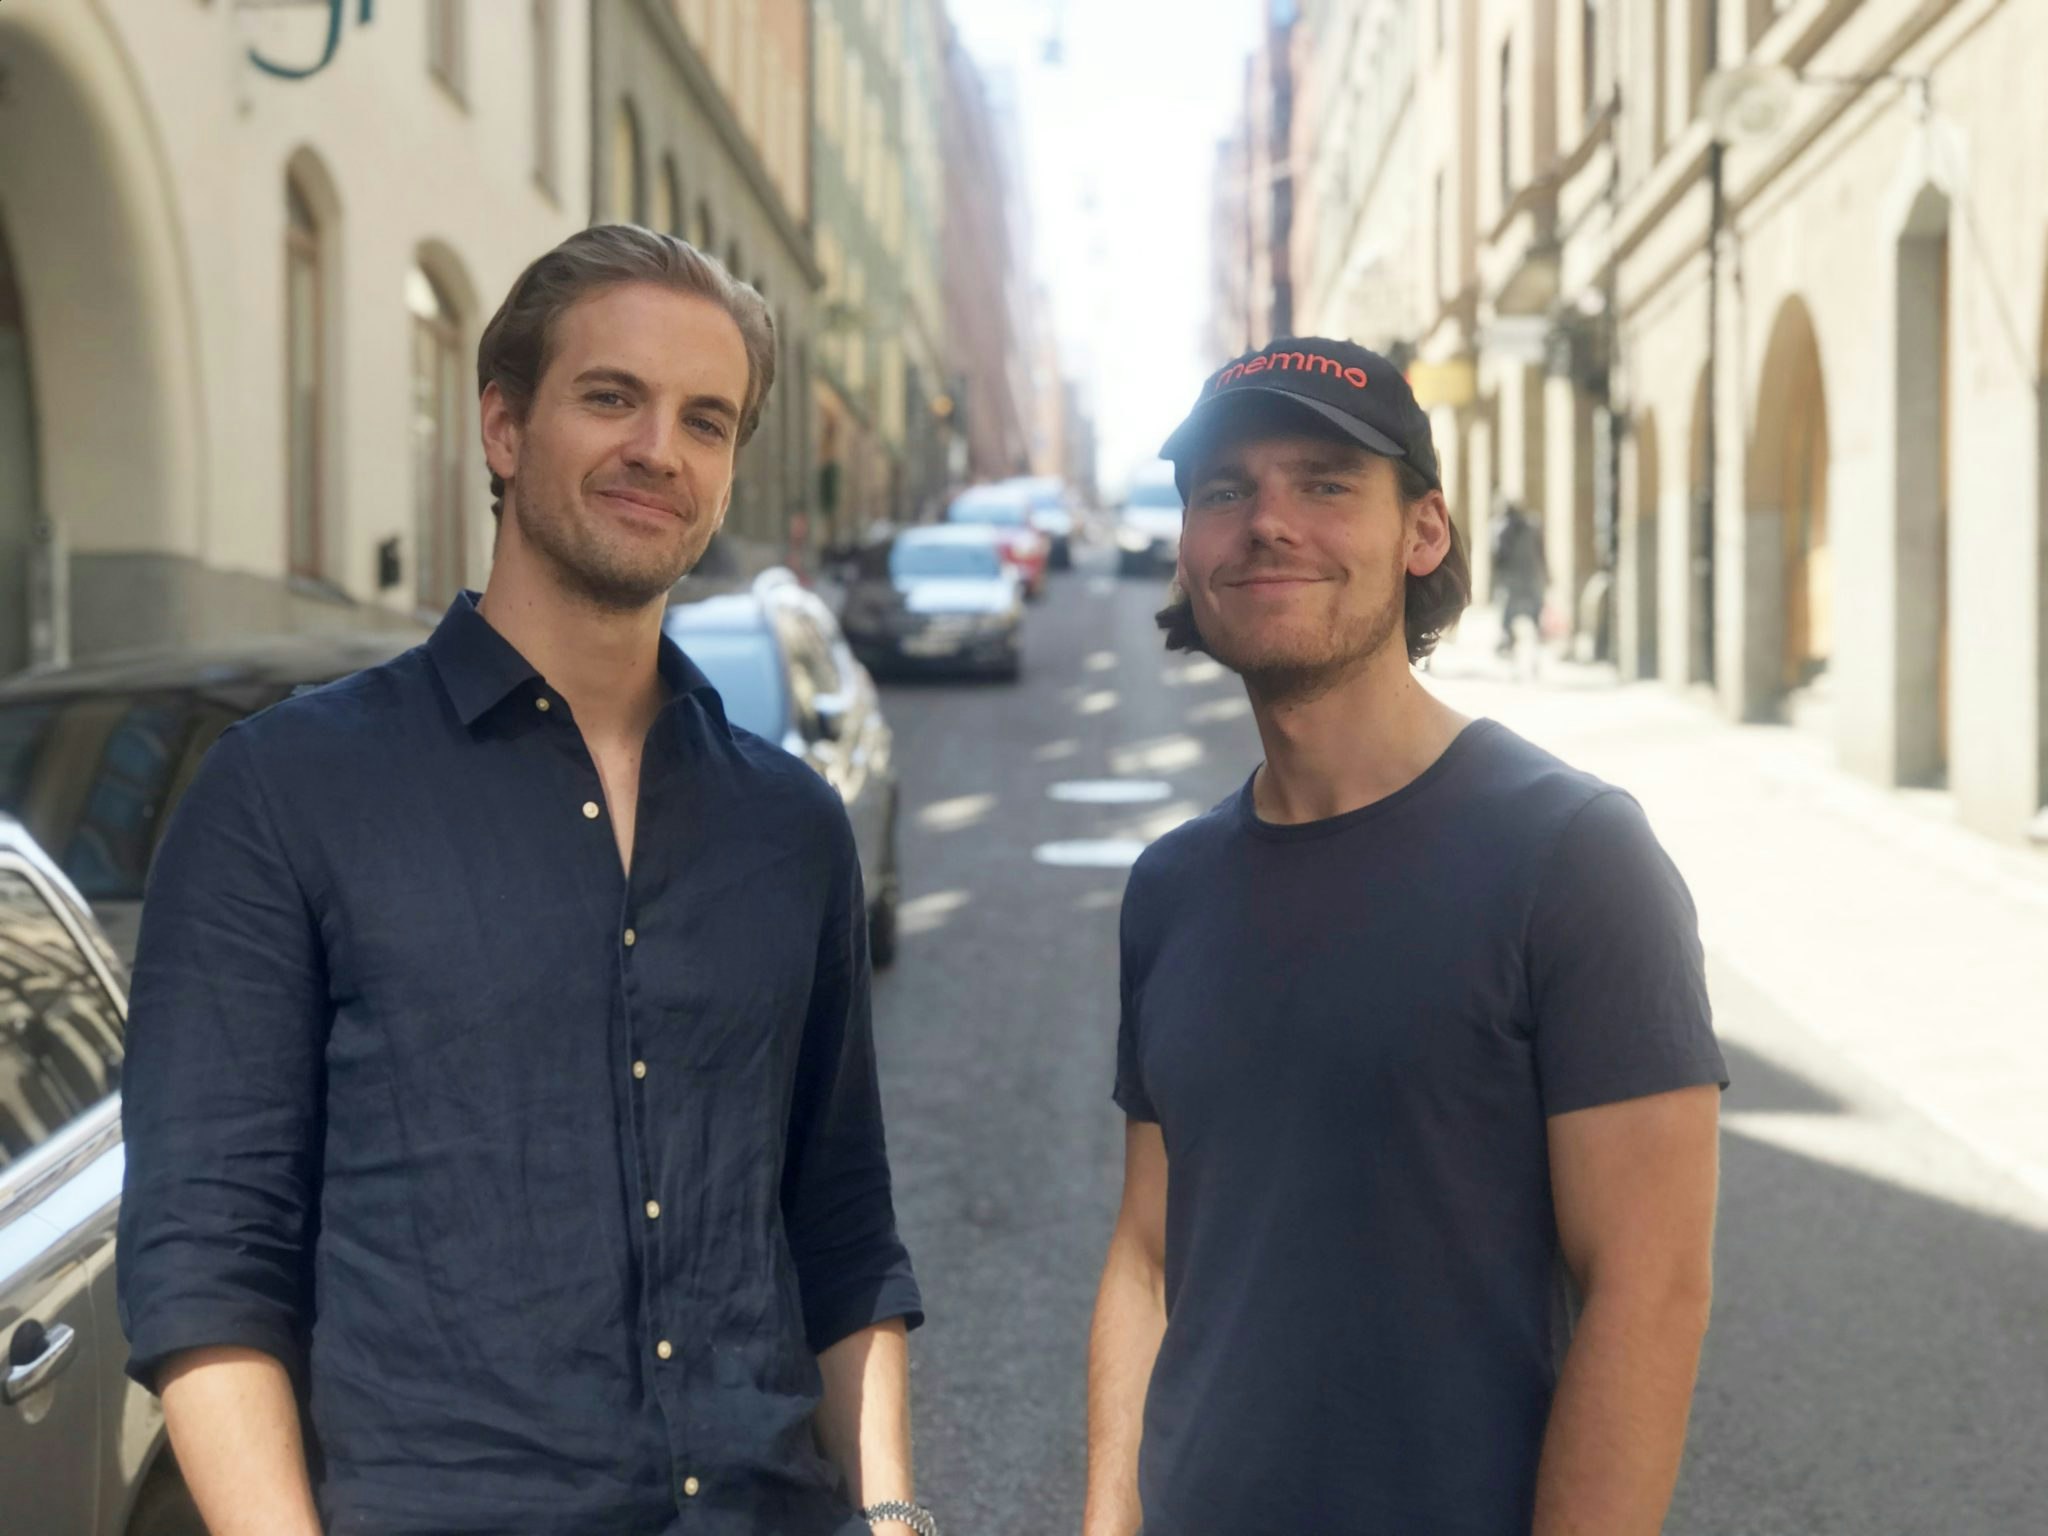 Memmo founders Gustaf Lundberg Toresson and Tobias Bengtsdahl standing next to each other on a street.